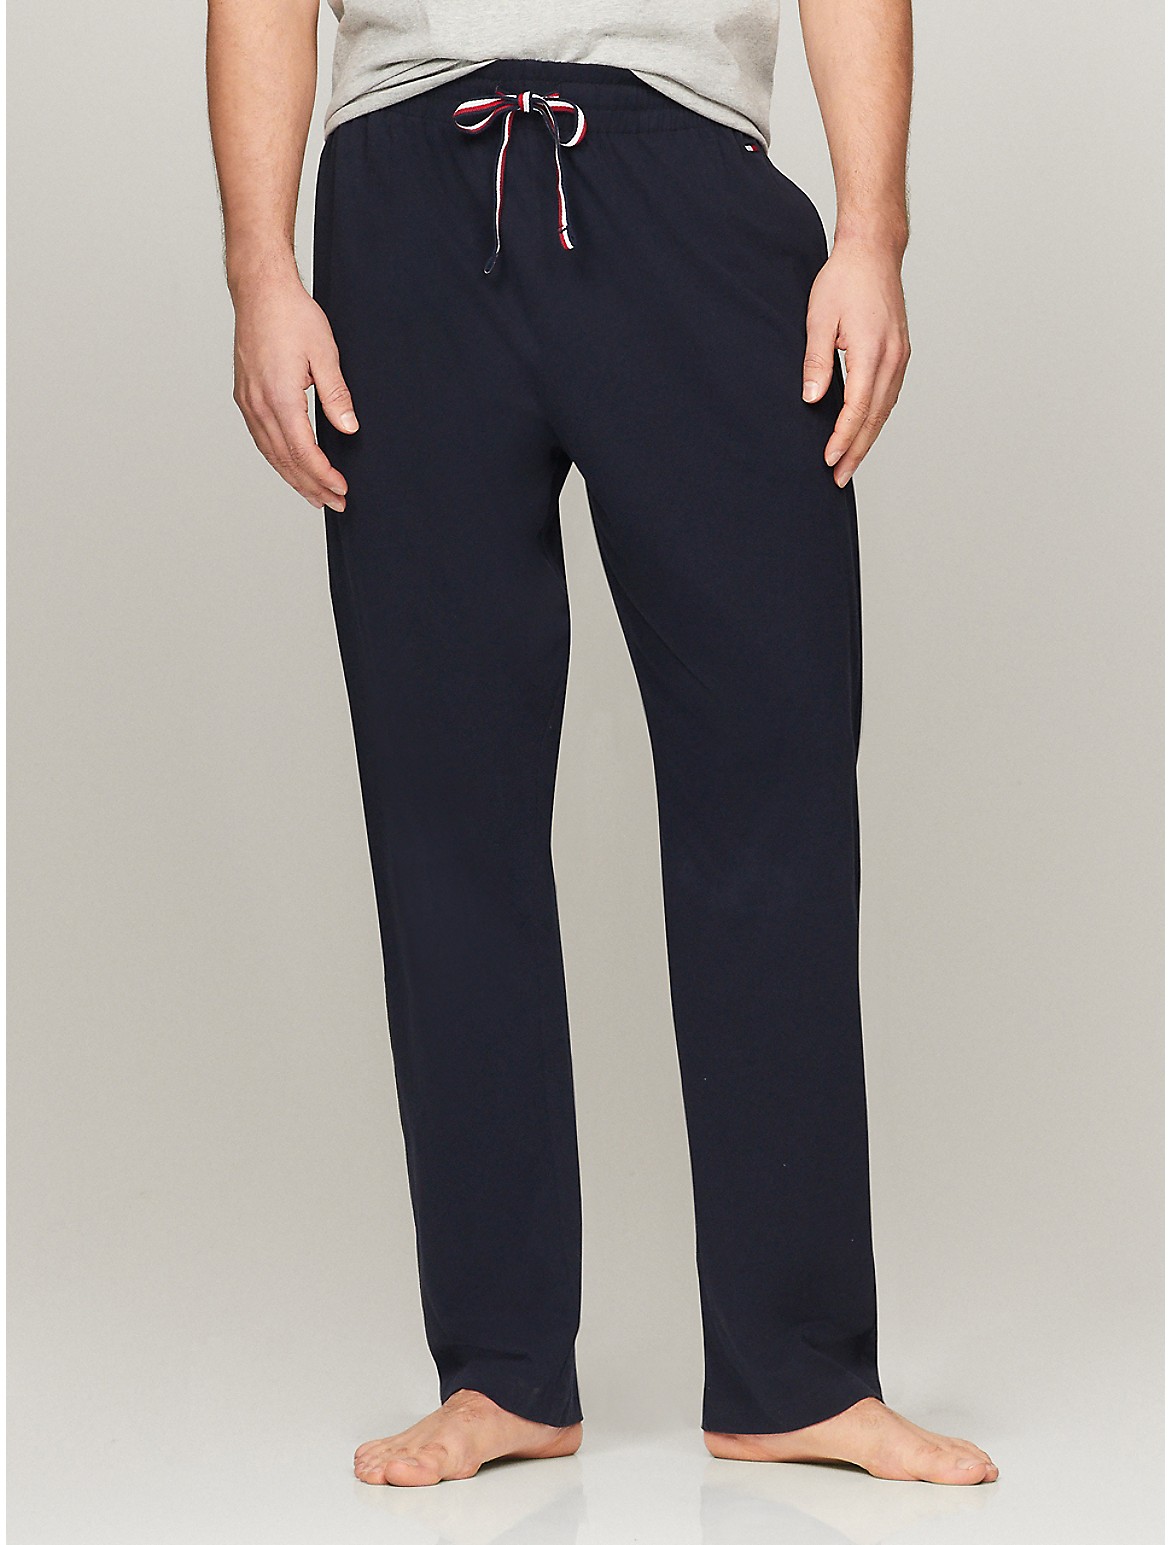 Tommy Hilfiger Men's Sueded Jersey Sleep Pant